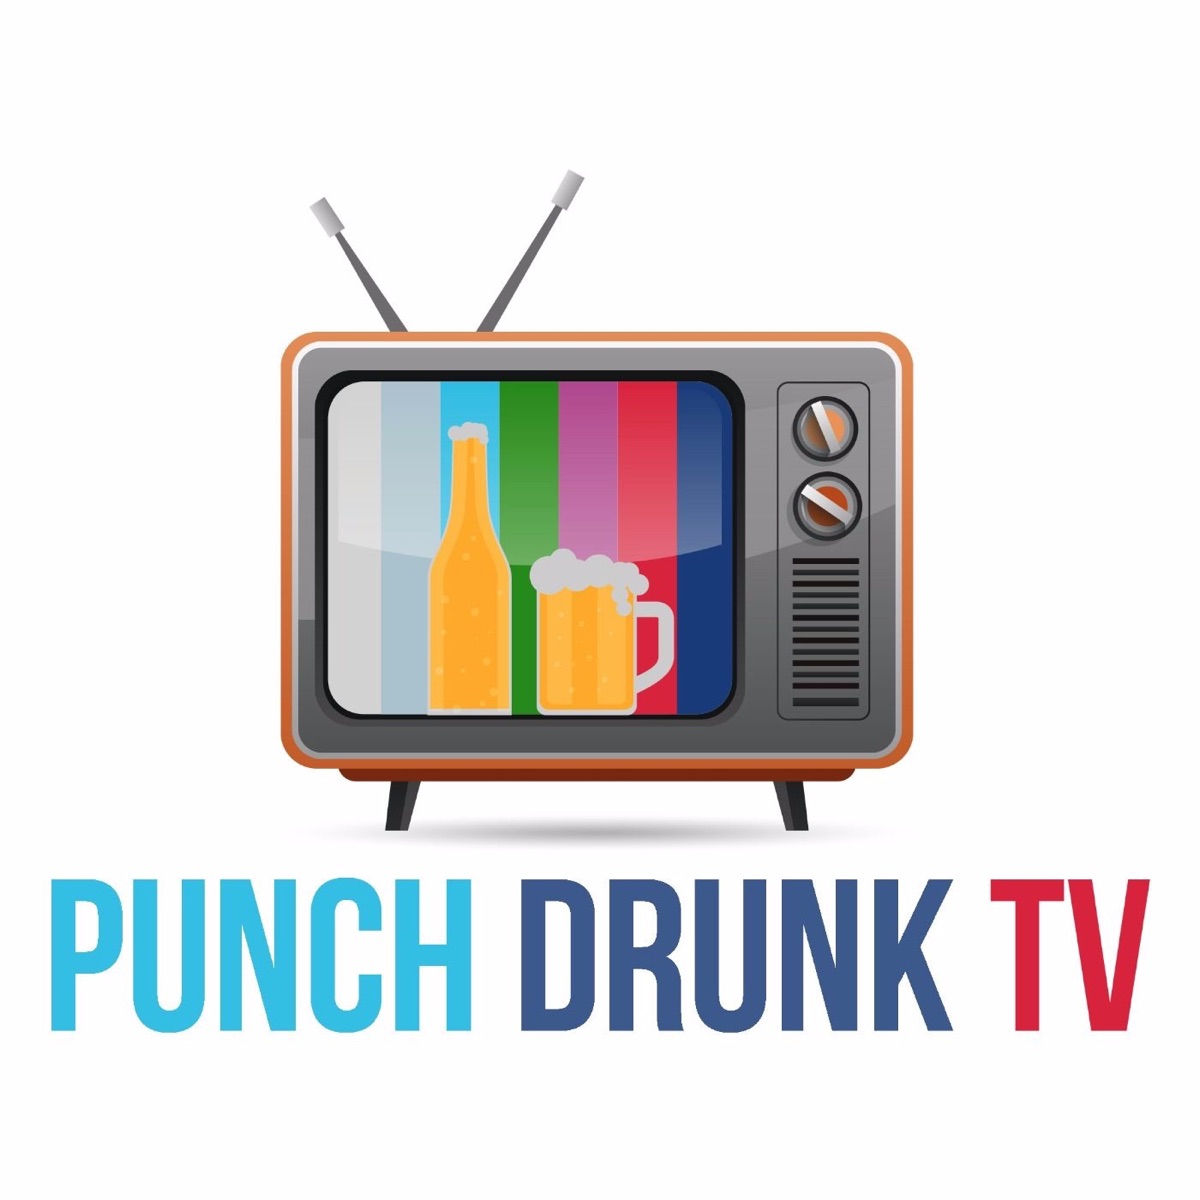 Punch Drunk TV – Podcast photo pic pic